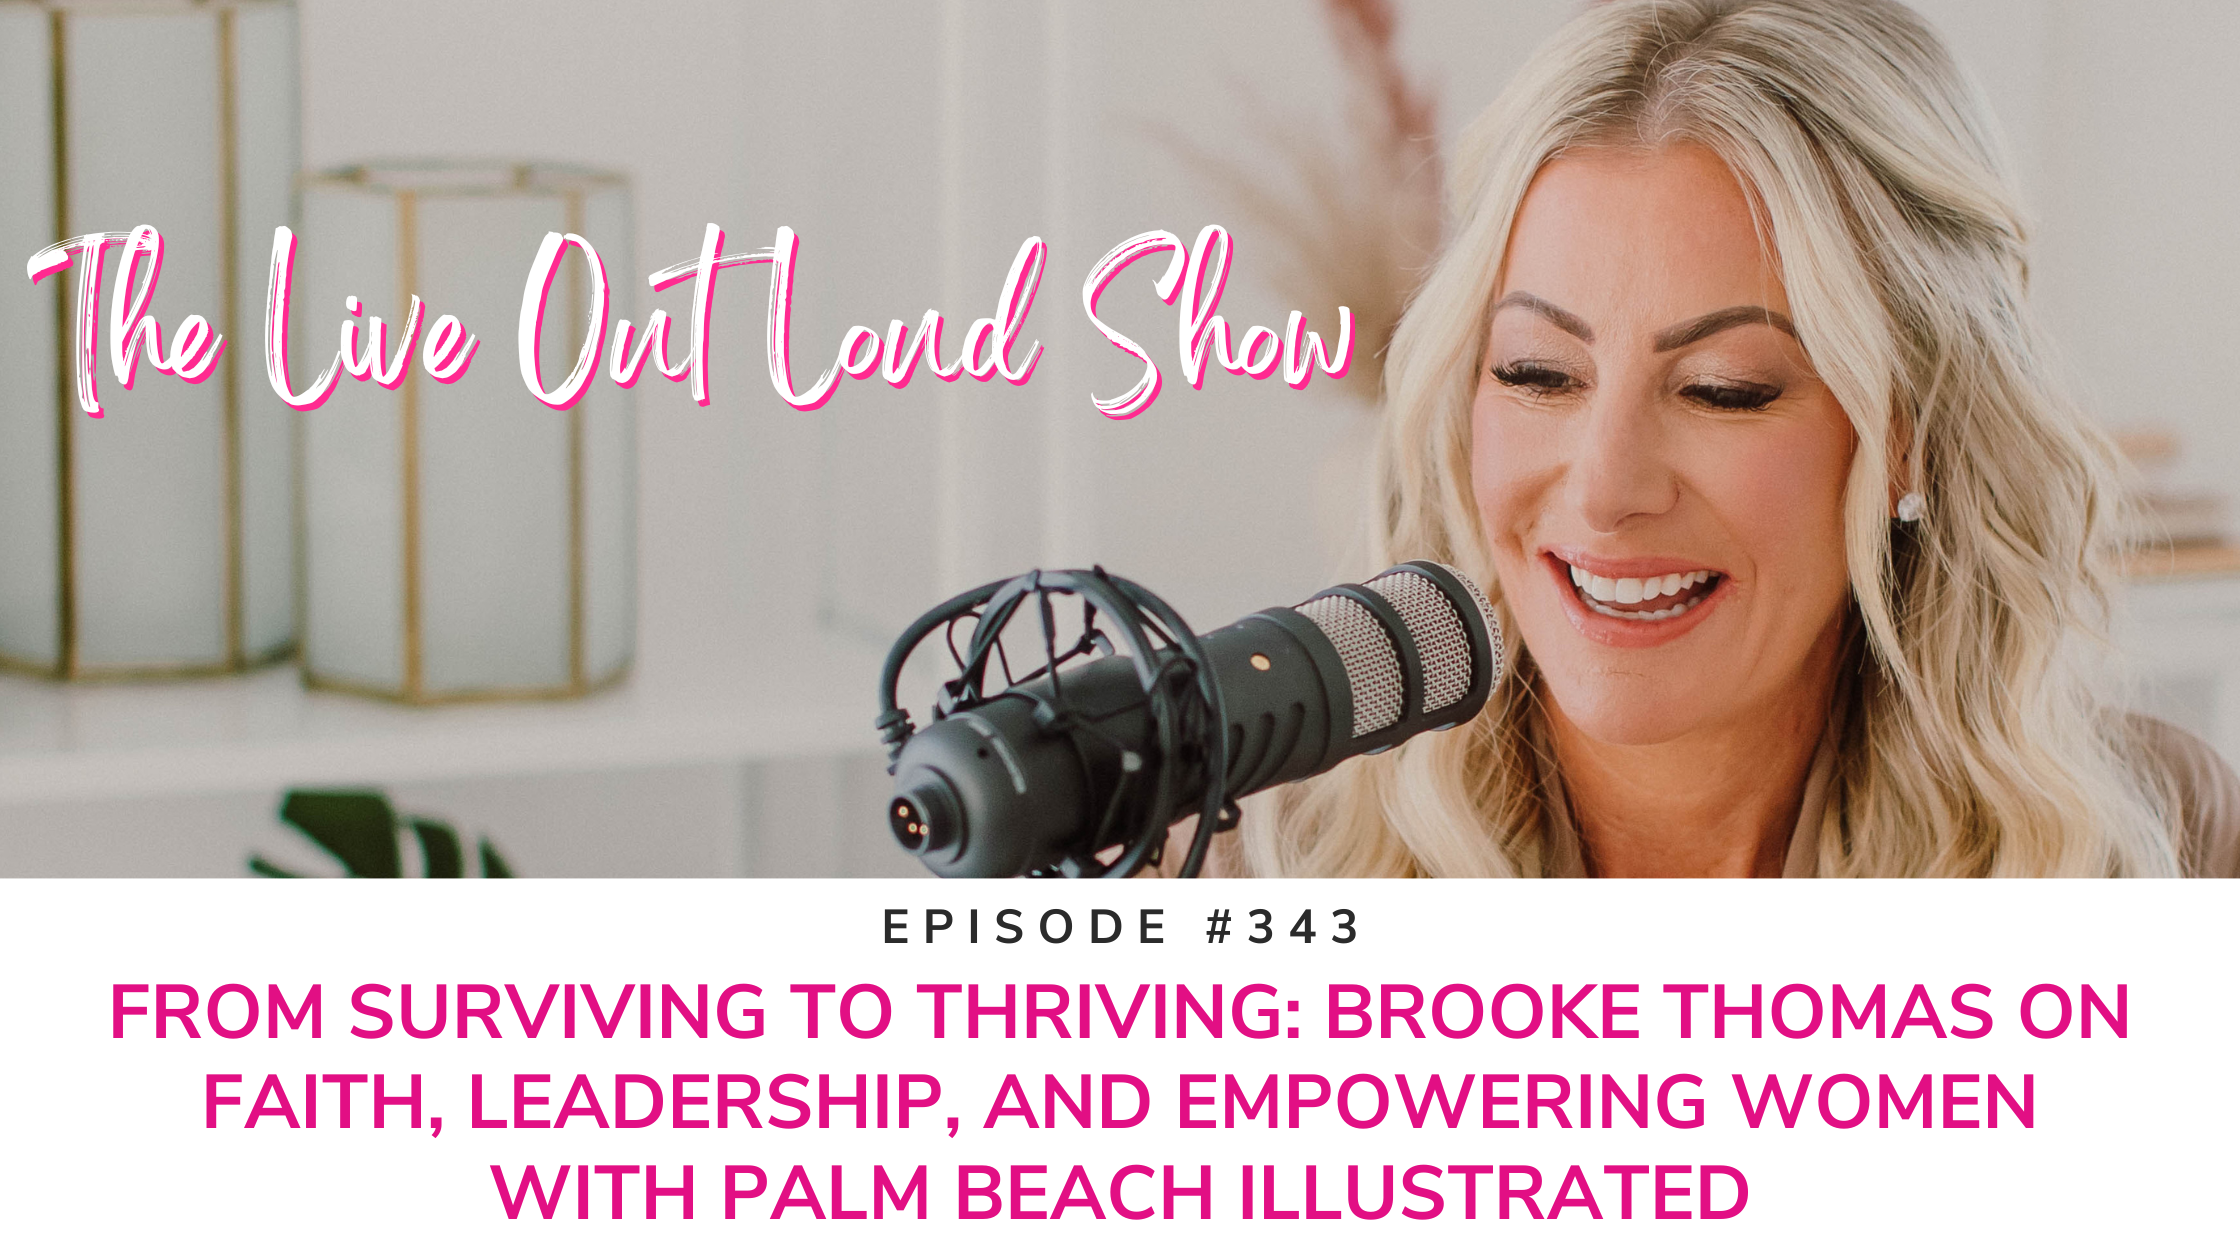 From Surviving to Thriving: Brooke Thomas on Faith, Leadership, and Empowering Women With Palm Beach Illustrated Episode 344